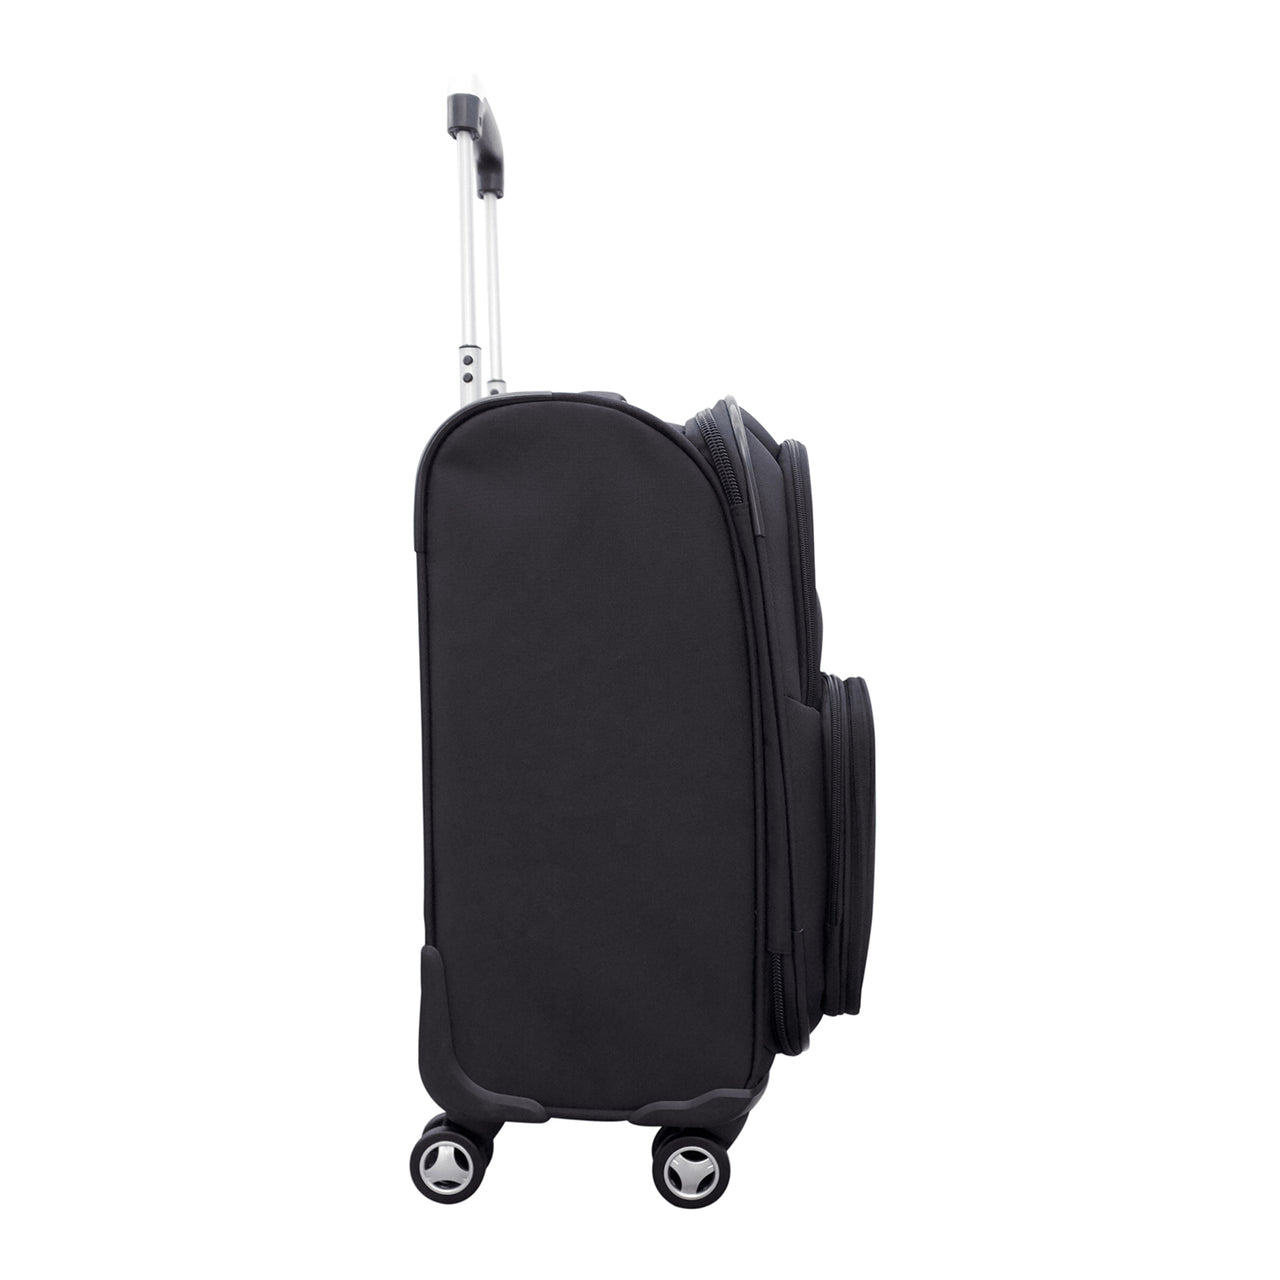 Cleveland Browns 21" Carry-on Spinner Luggage